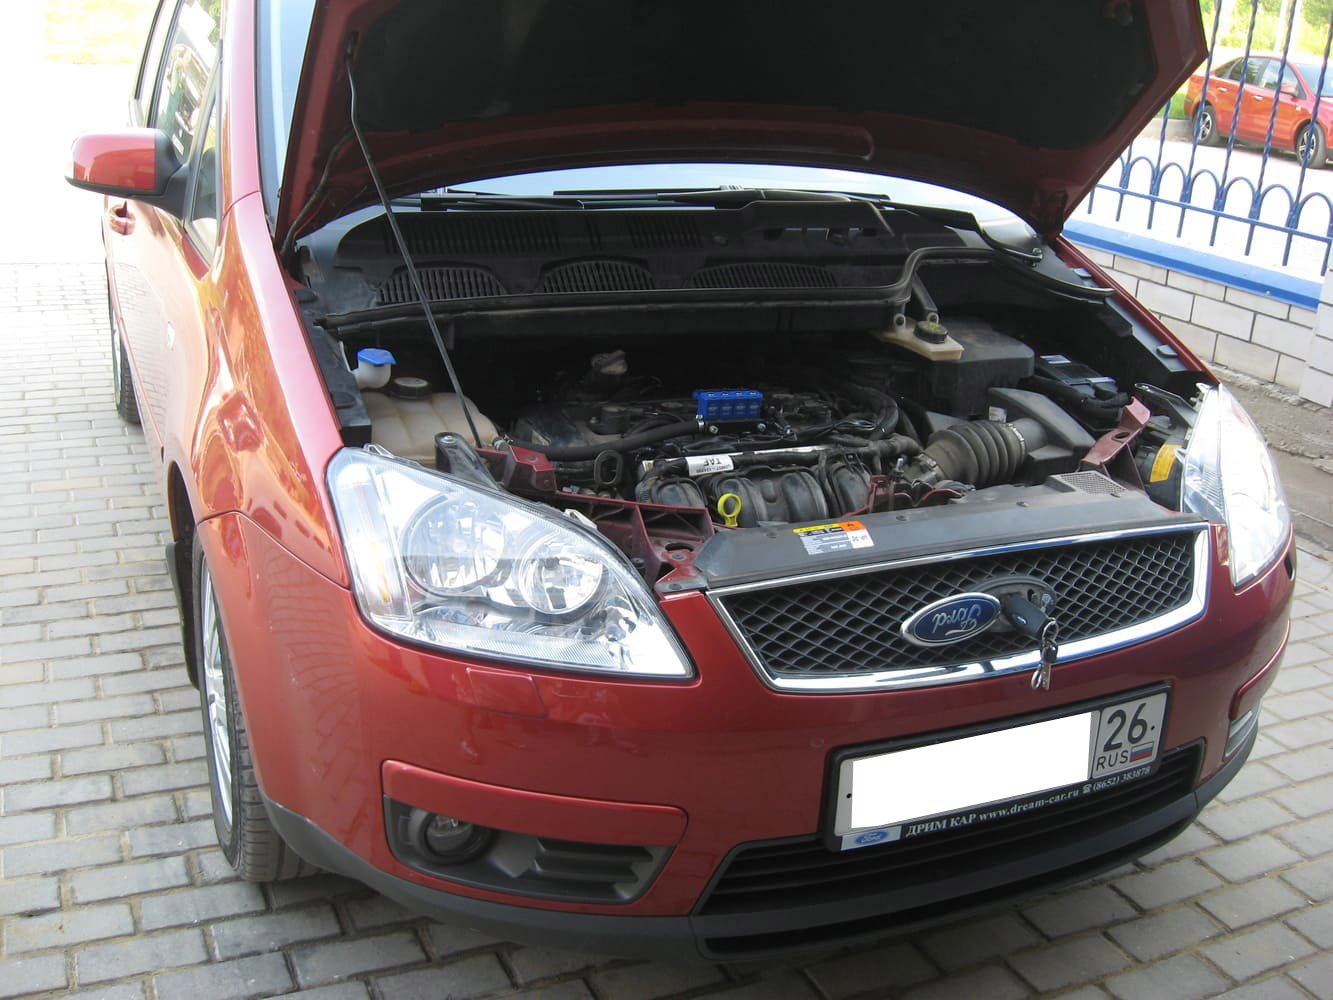 Ford C-Max (2003-2007) 2.0 л.